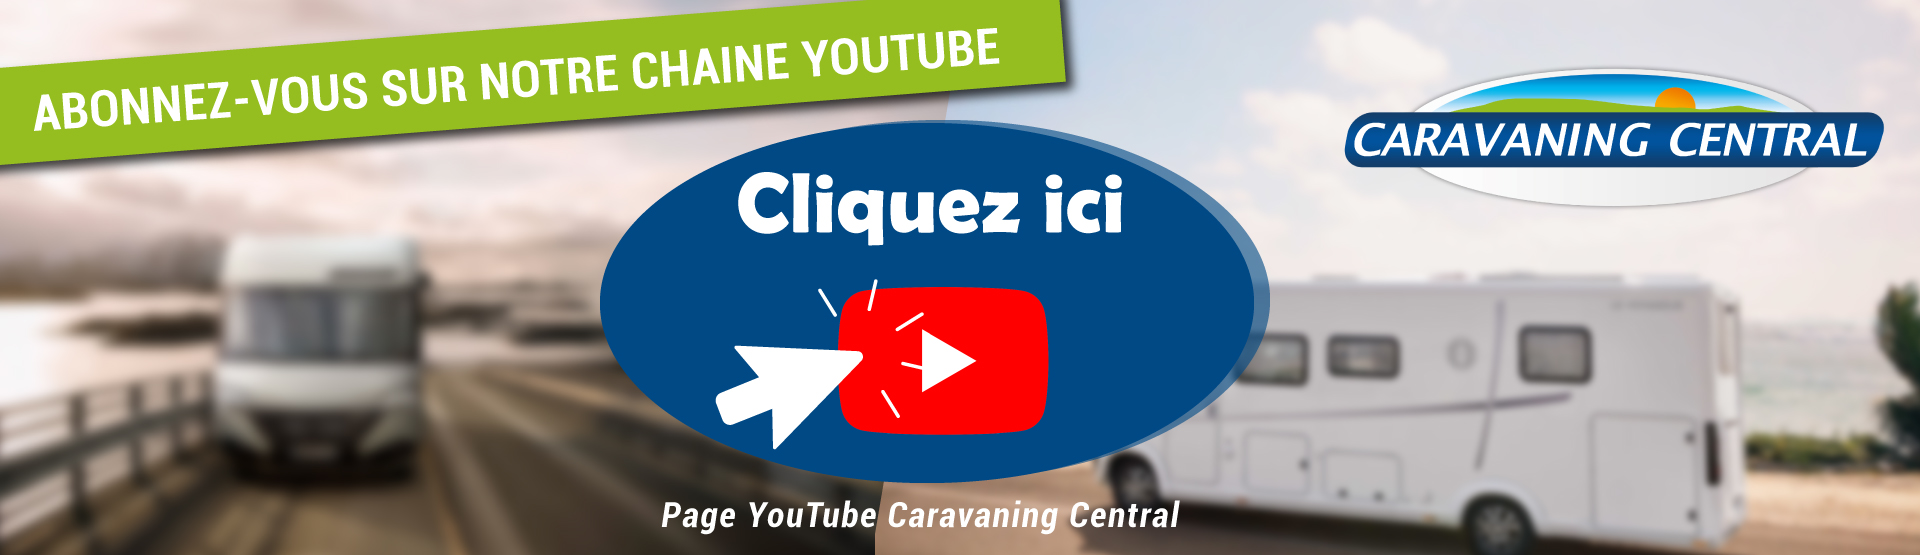 PAGE YOUTUBE CARAVANING CENTRAL